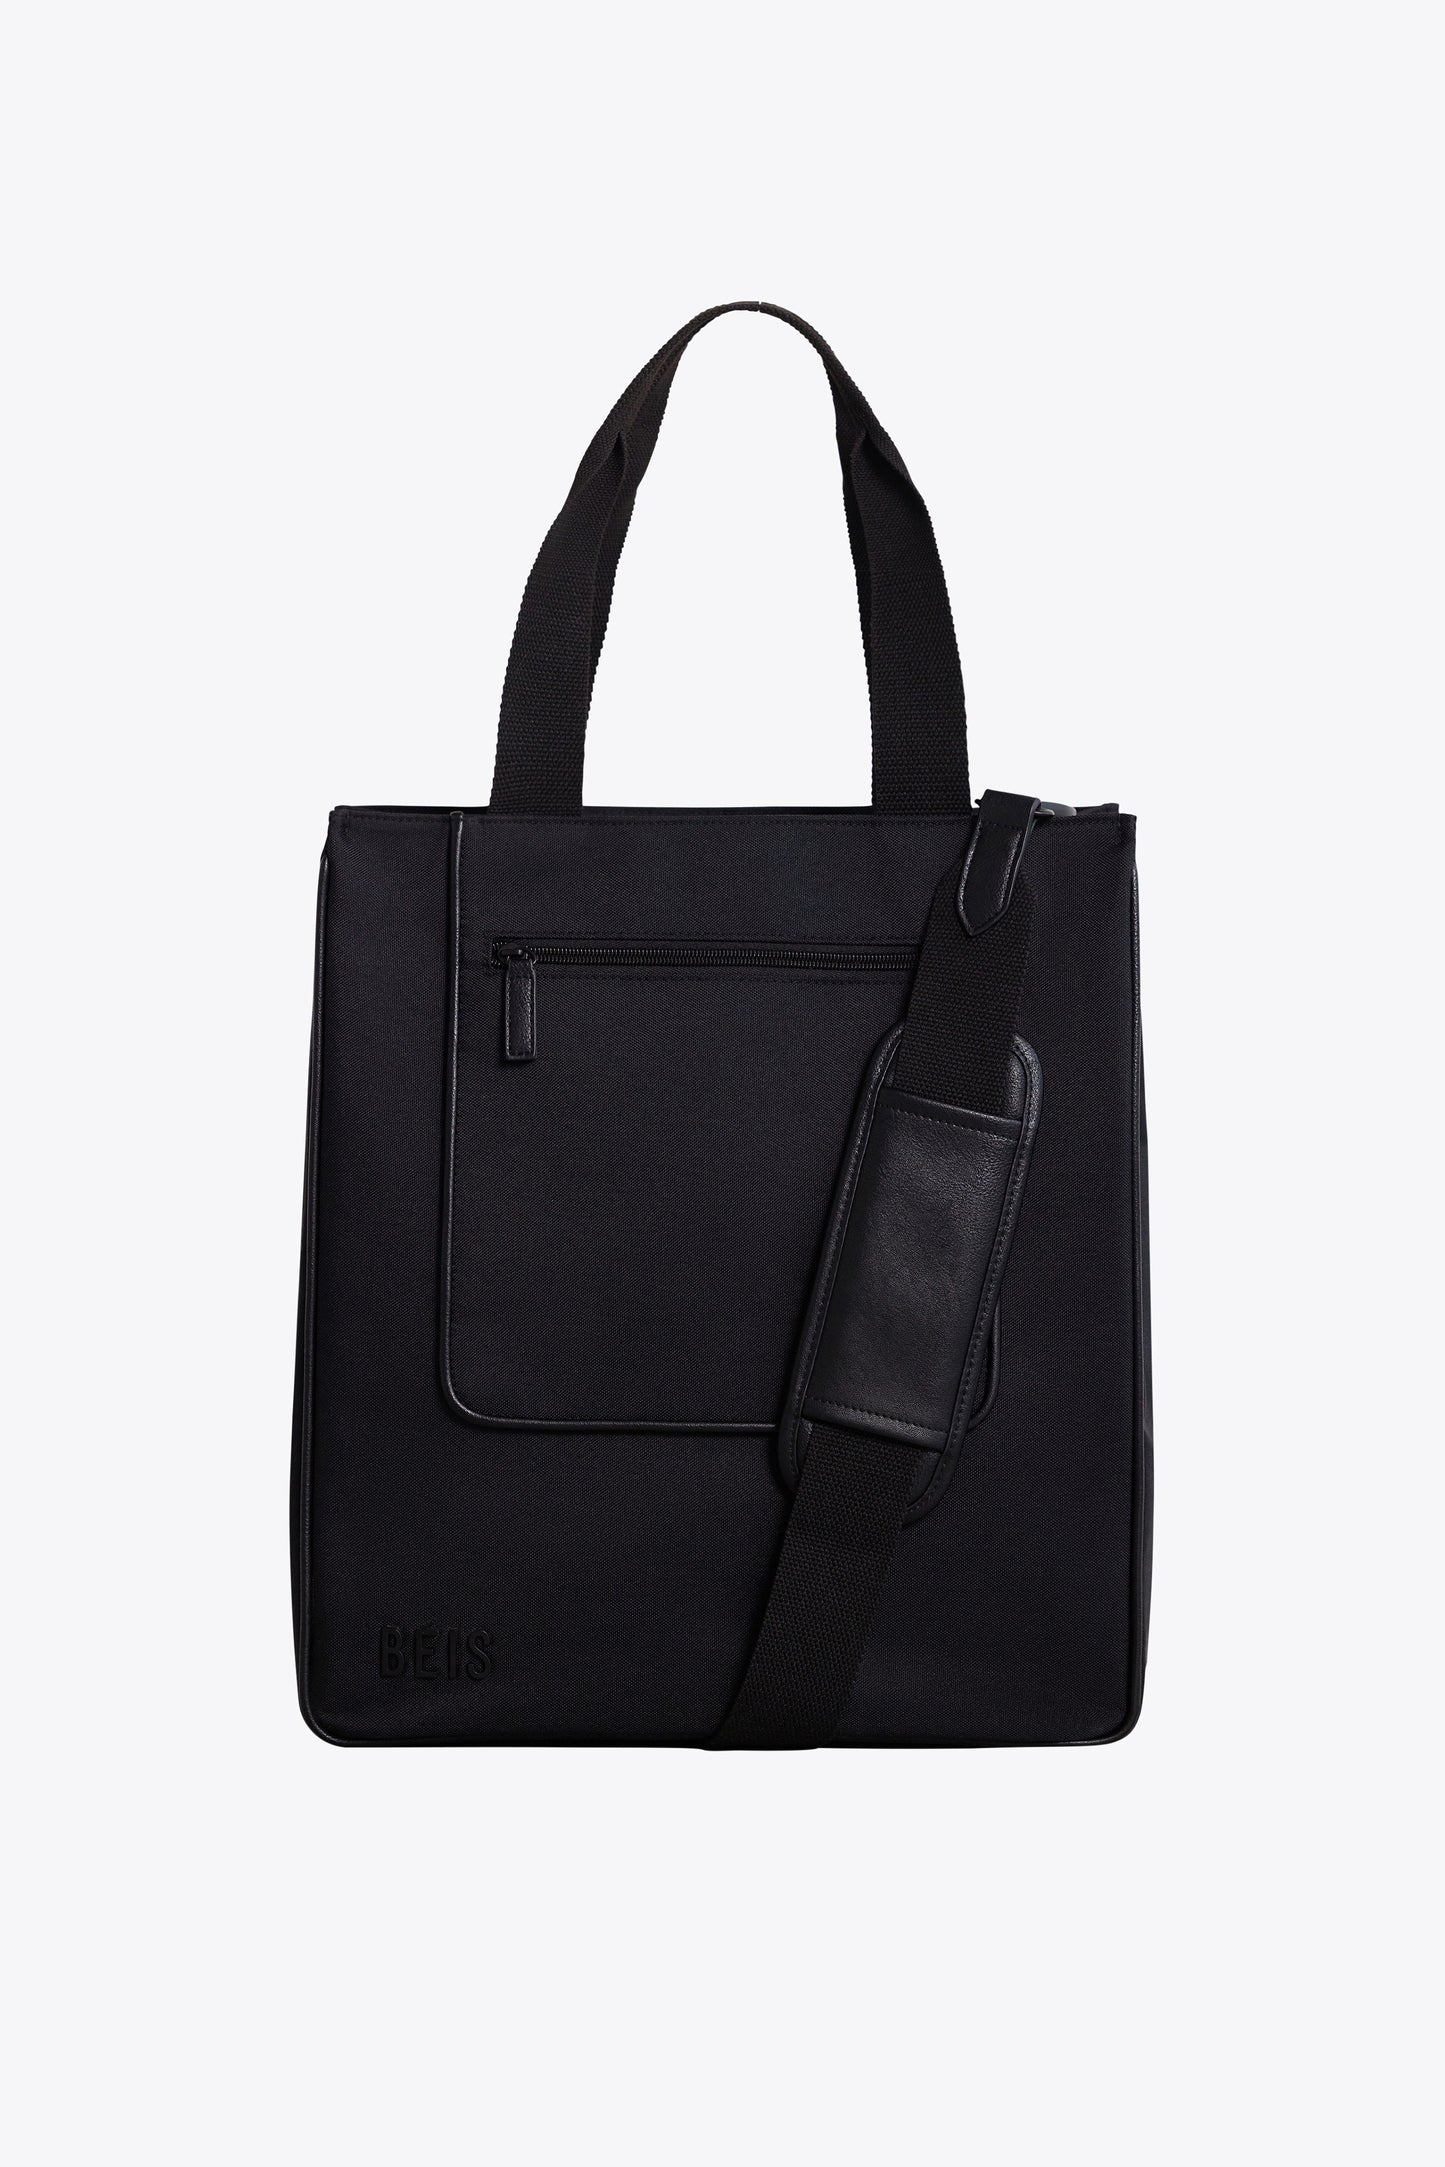 Tote Bags Collection for Men